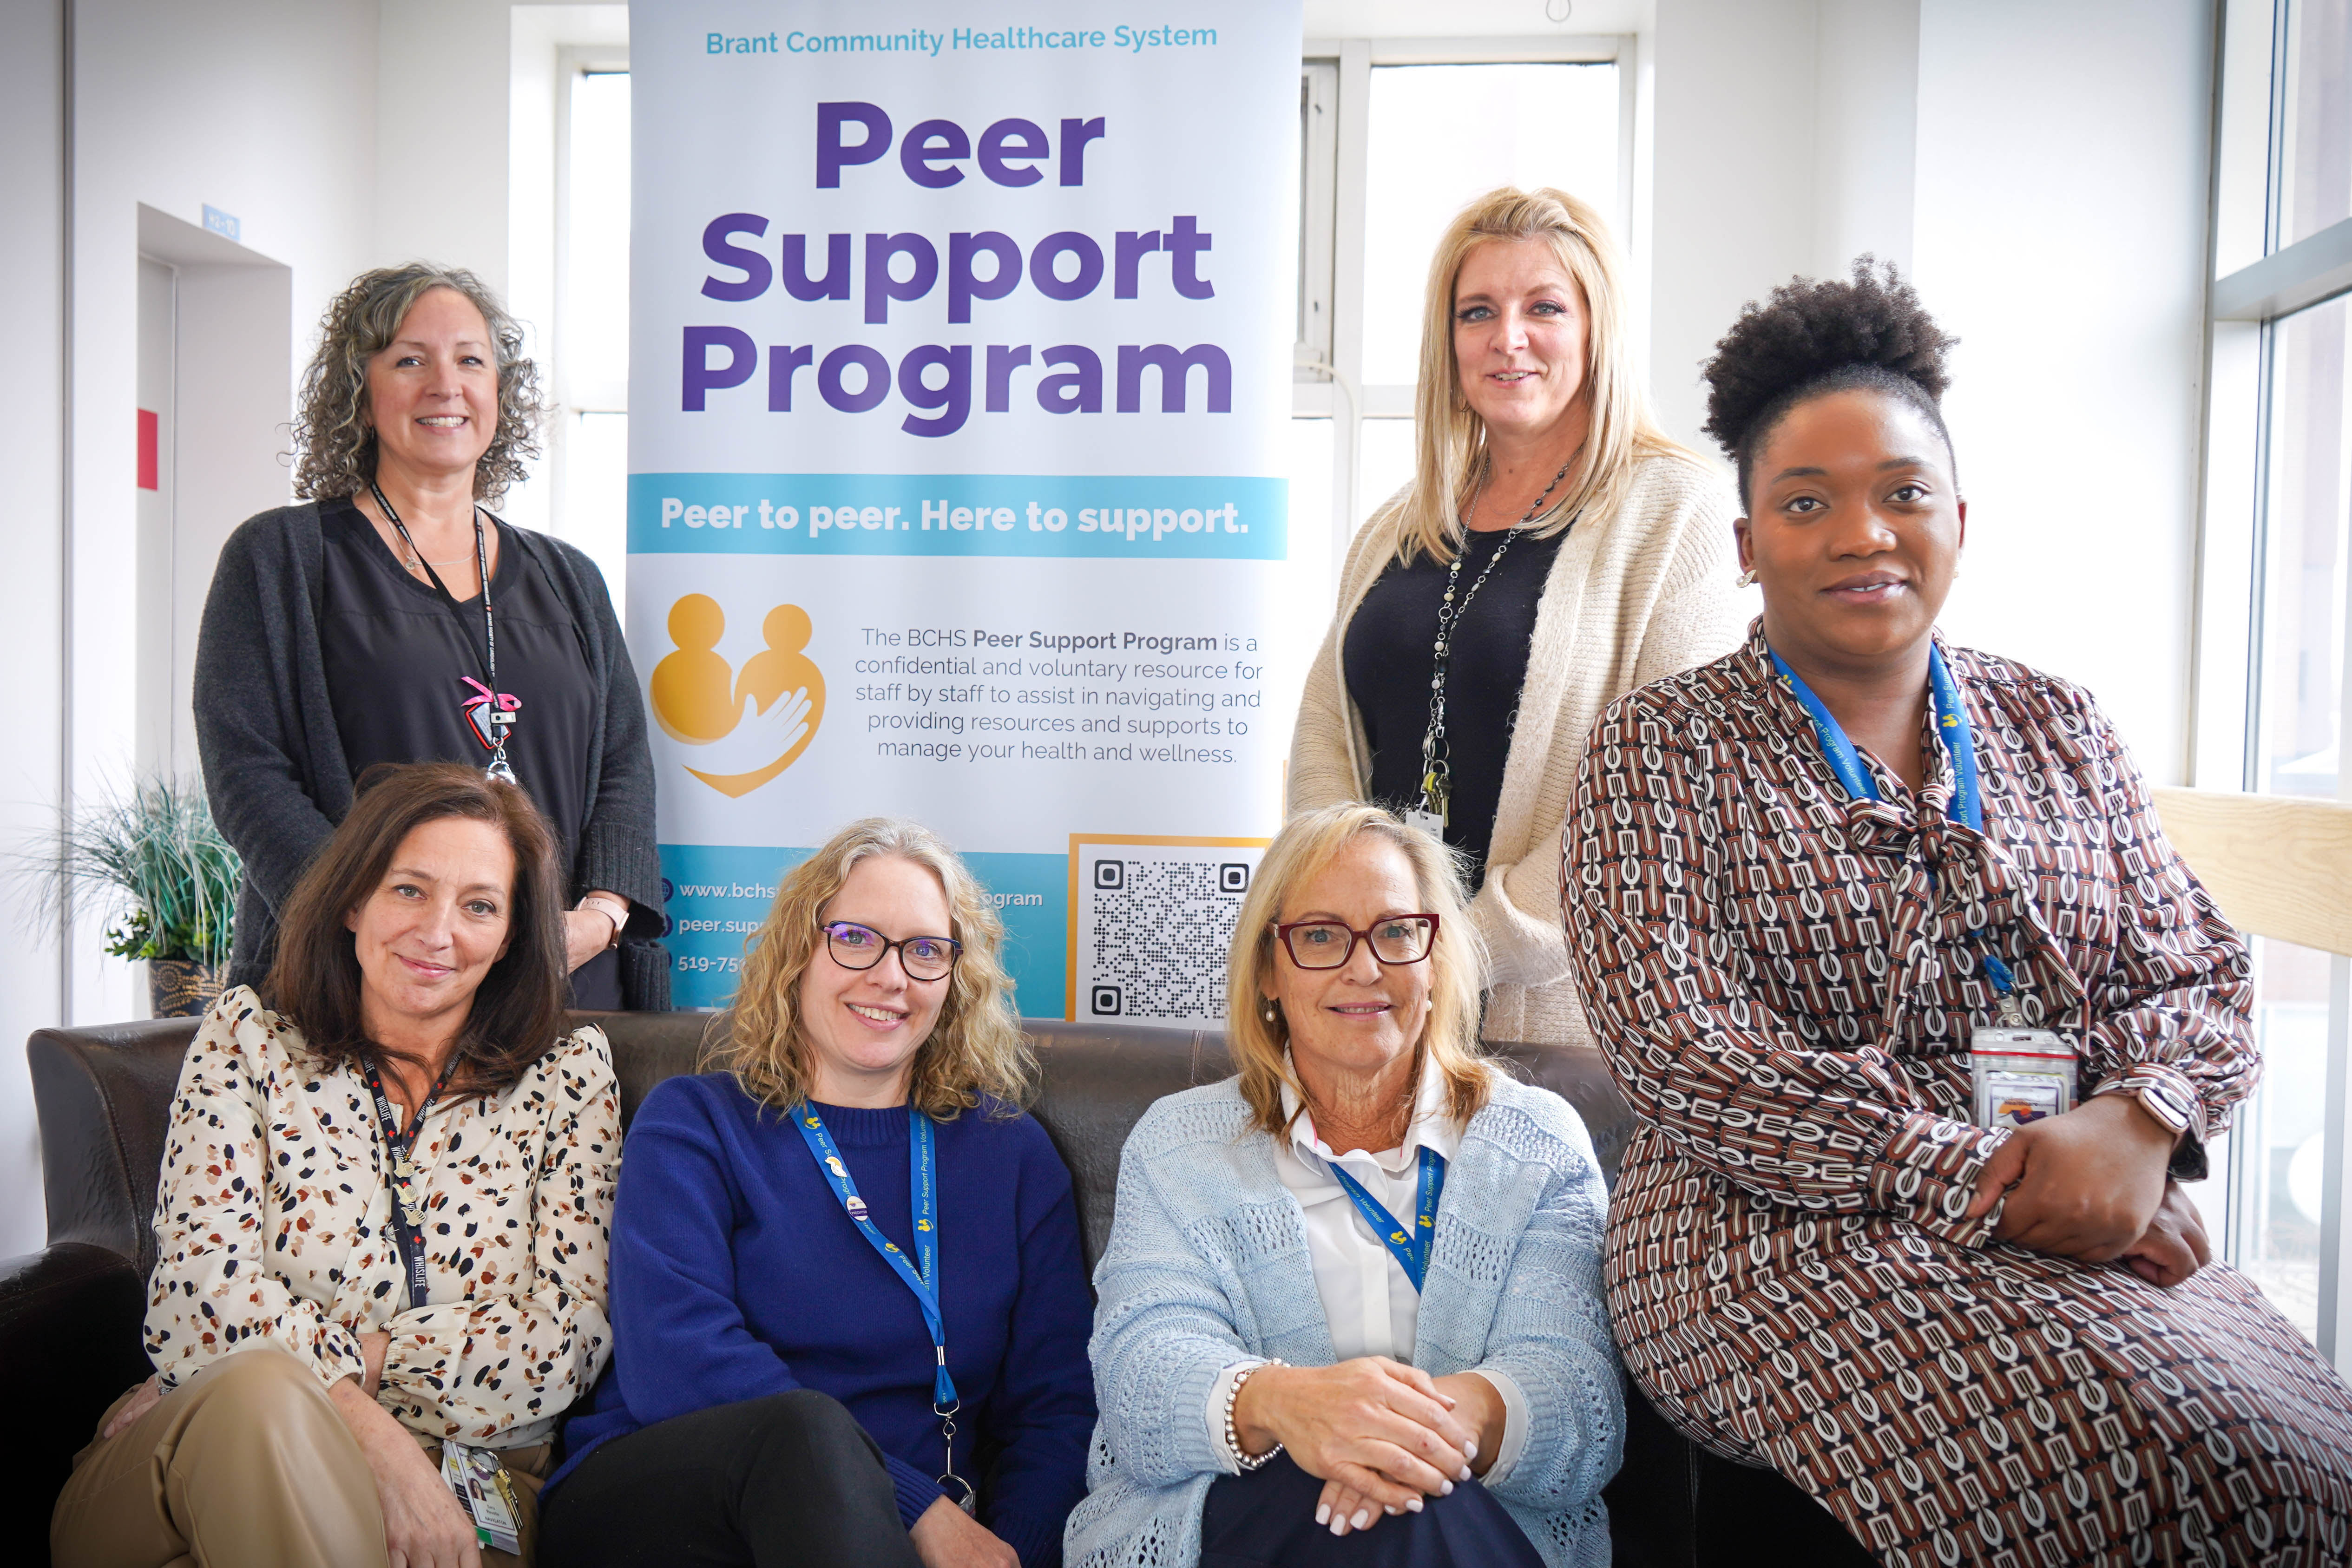 Cindy Hayward-Dale (back right), interim director of Organizational Health, Organizational Development, and Volunteer Engagement for Brantford Community Health System, and Audrey Zheke (front right), peer support and wellness specialist, sit with BCHS Peer Support Program team members